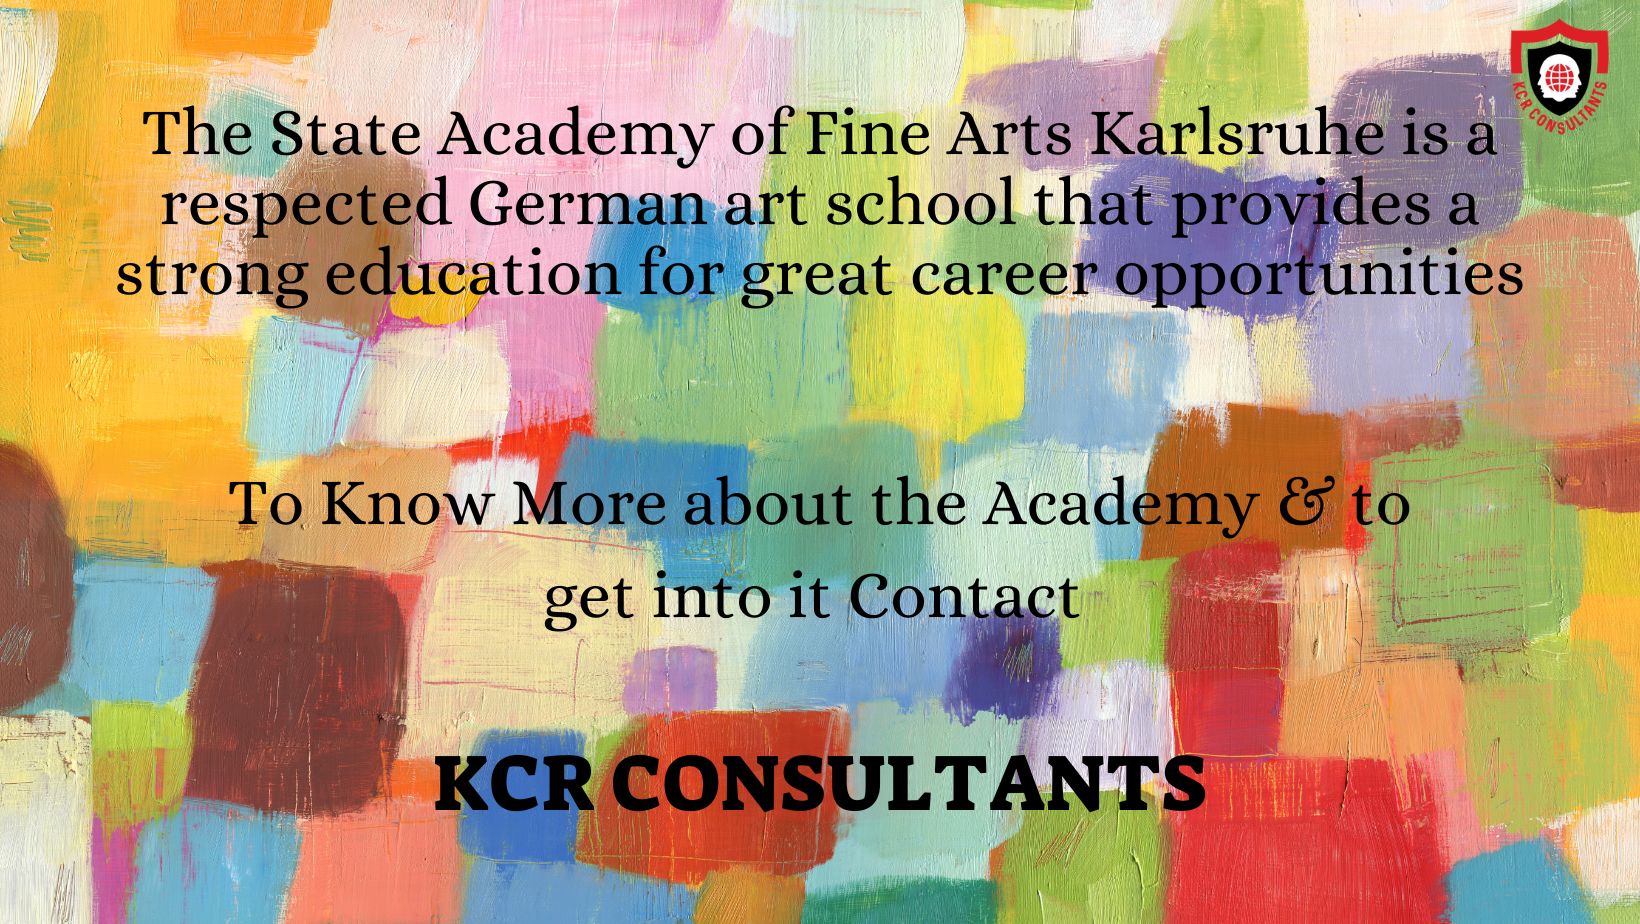 STATE ACADEMY OF FINE ARTS KARLSRUHE - KCR CONSULTANTS - Contact US